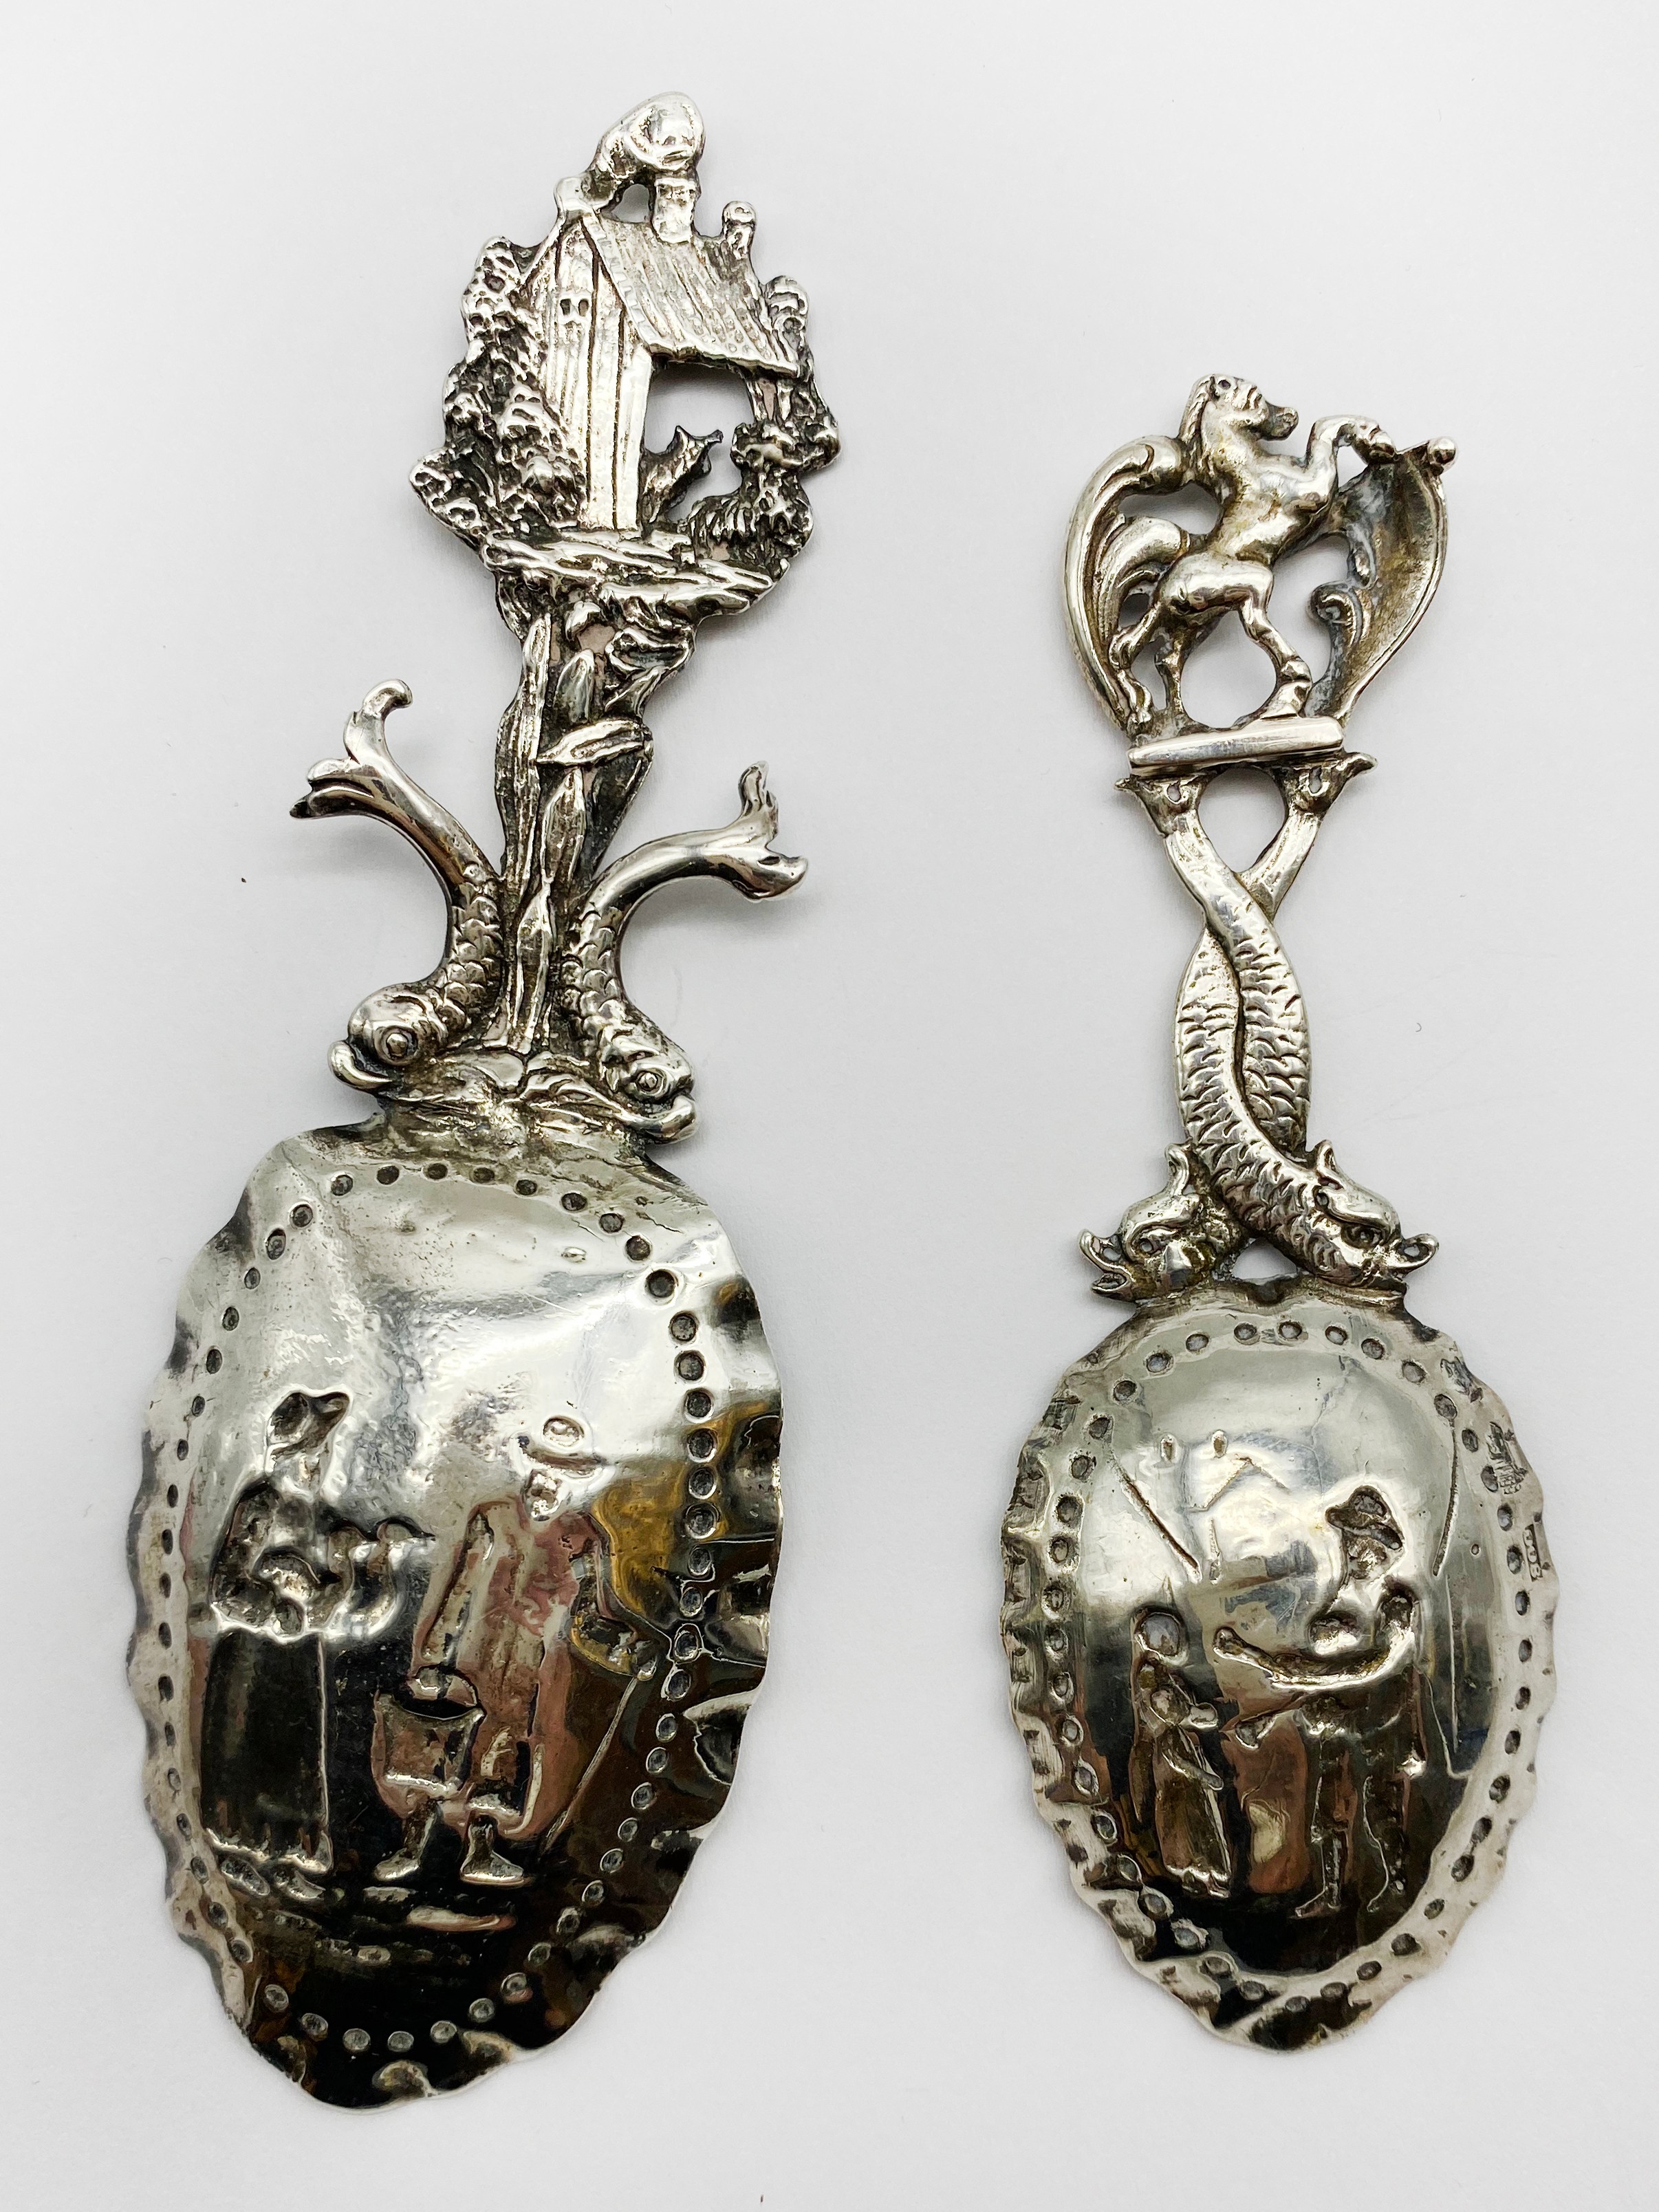 TWO ANTIQUE ORNATE SILVER DUTCH TEA CADDY SPOONS - Image 2 of 3